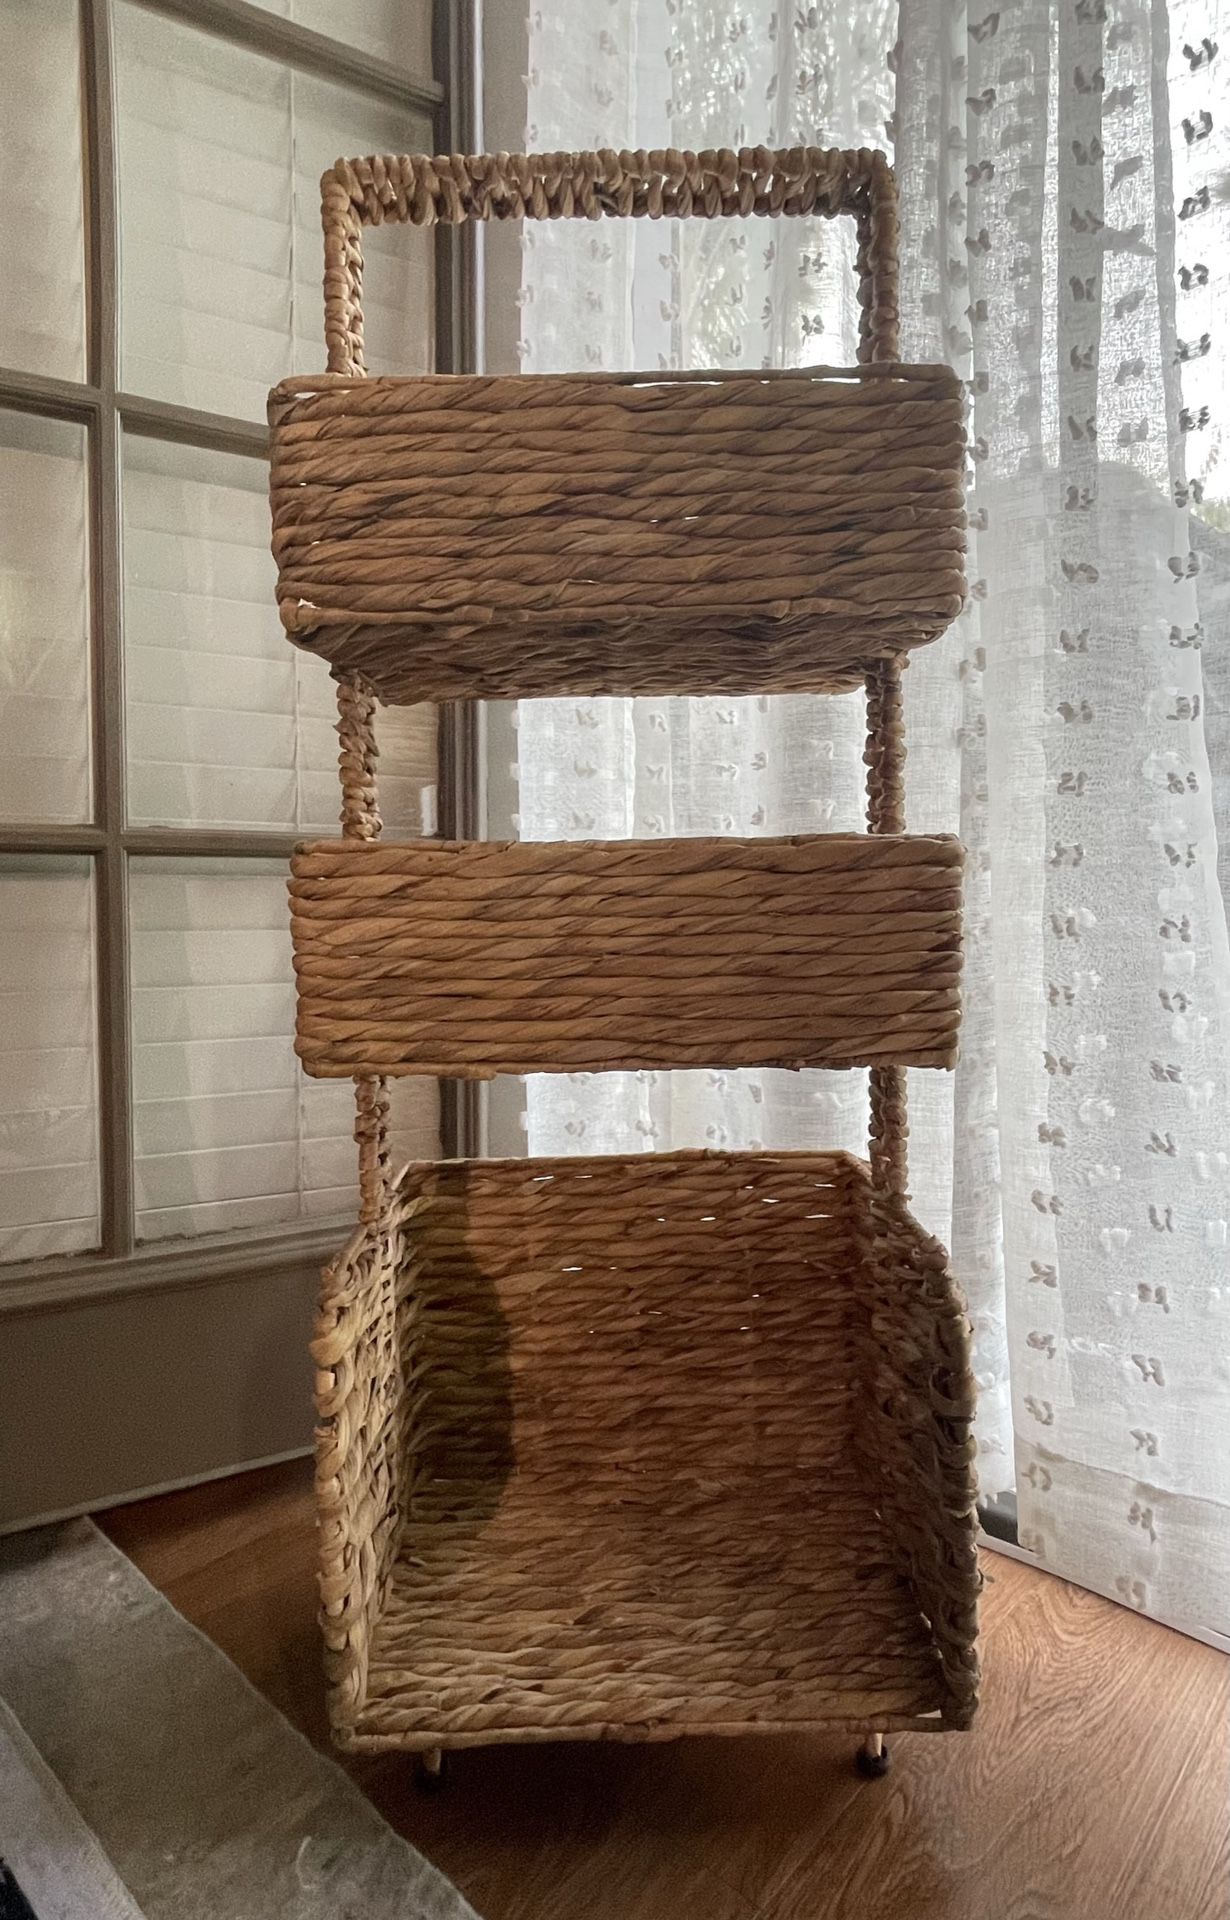 Rustic Boho Modern Woven Seagrass 3 Tiered Stacked Storage Unit, Bins, Shelves | Dining, Kitchen, Closet, Office, Desk, Utility Storage